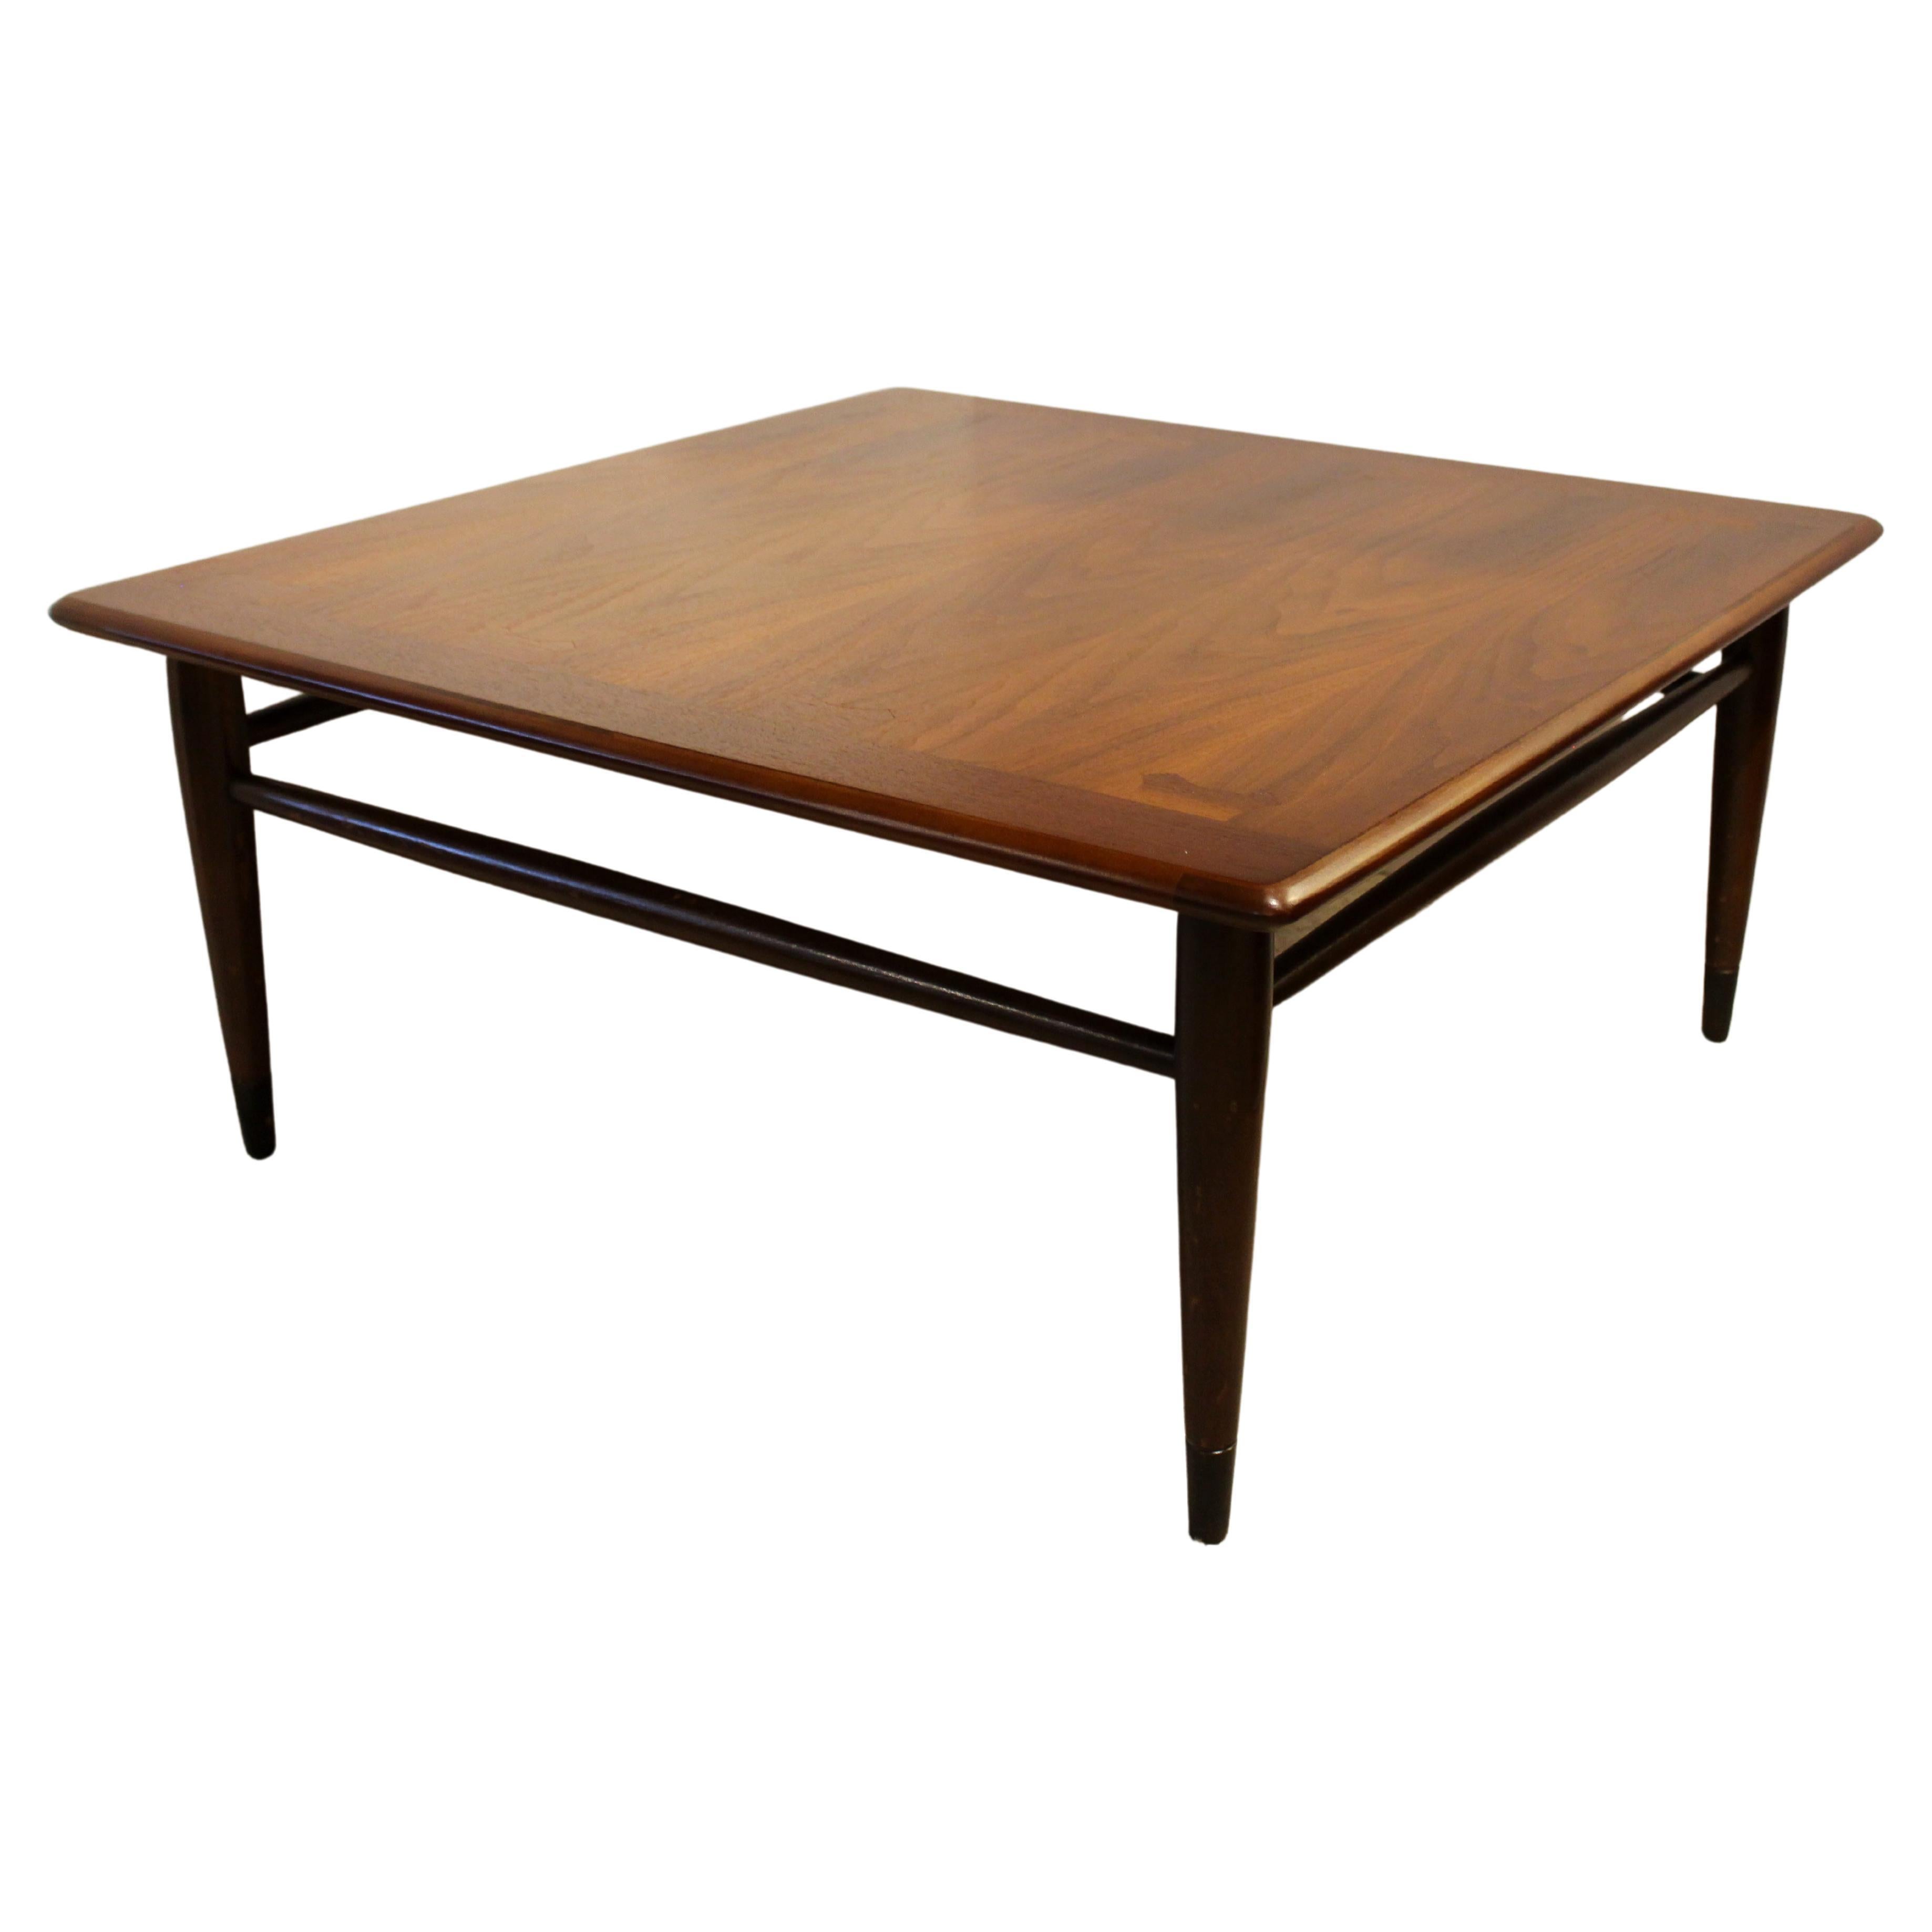 Circa 1960 Mid-Century Modern Square Coffee or Corner Table For Sale